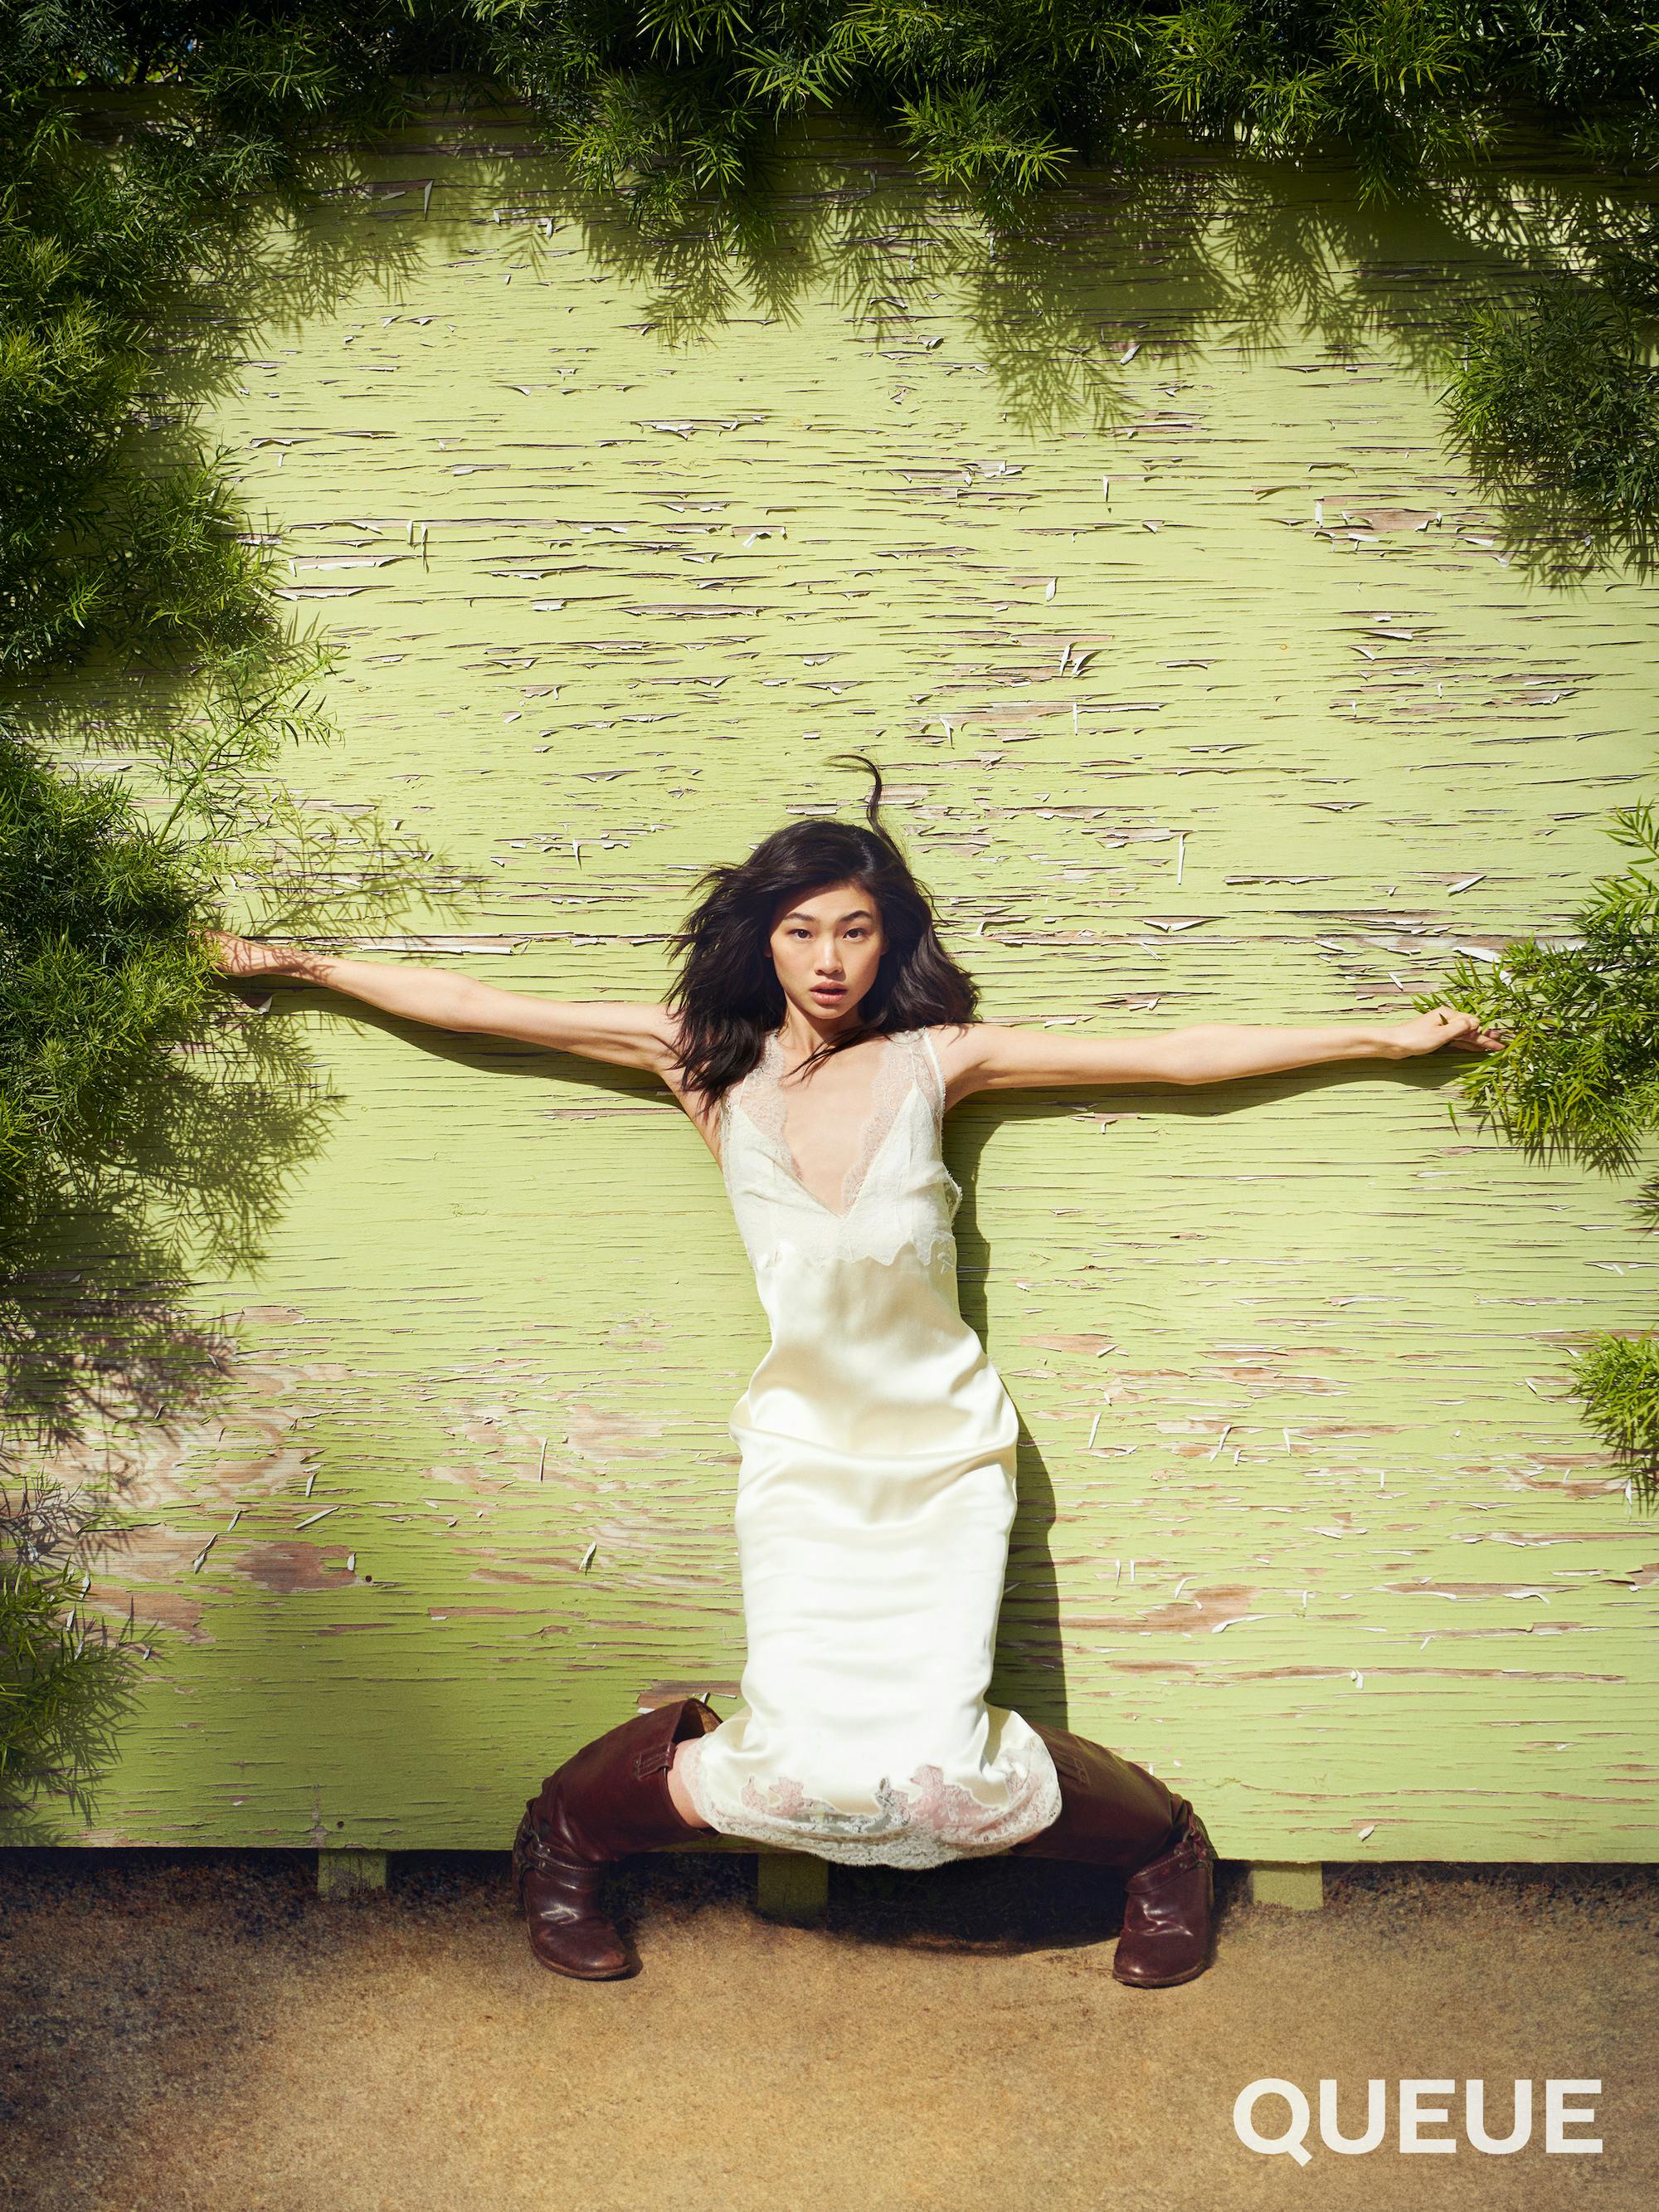 Jung Ho-yeon wears a white slip and brown boots and rests against a green wall.  